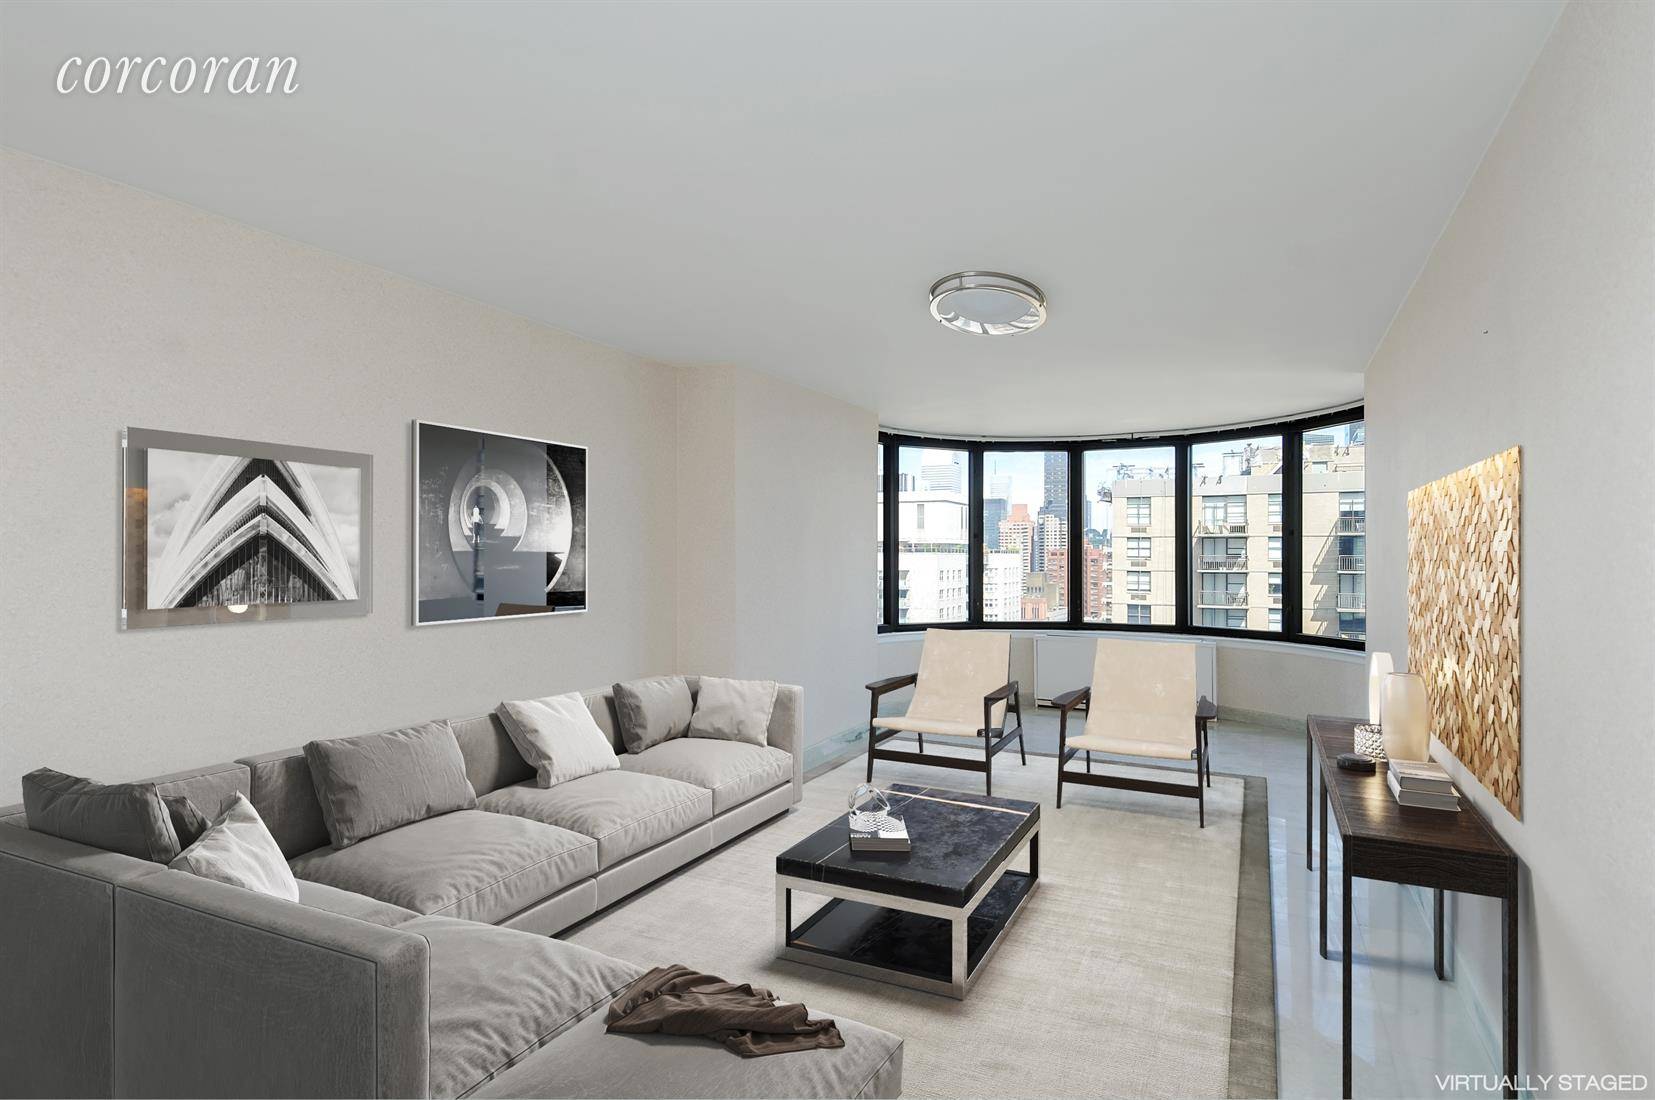 Spectacular flexible open floor plan Large 3 bedrooms, 2 large Marble bathrooms, Renovated kitchen, with new appliances and Sub Zero fridge, 2 balconies.